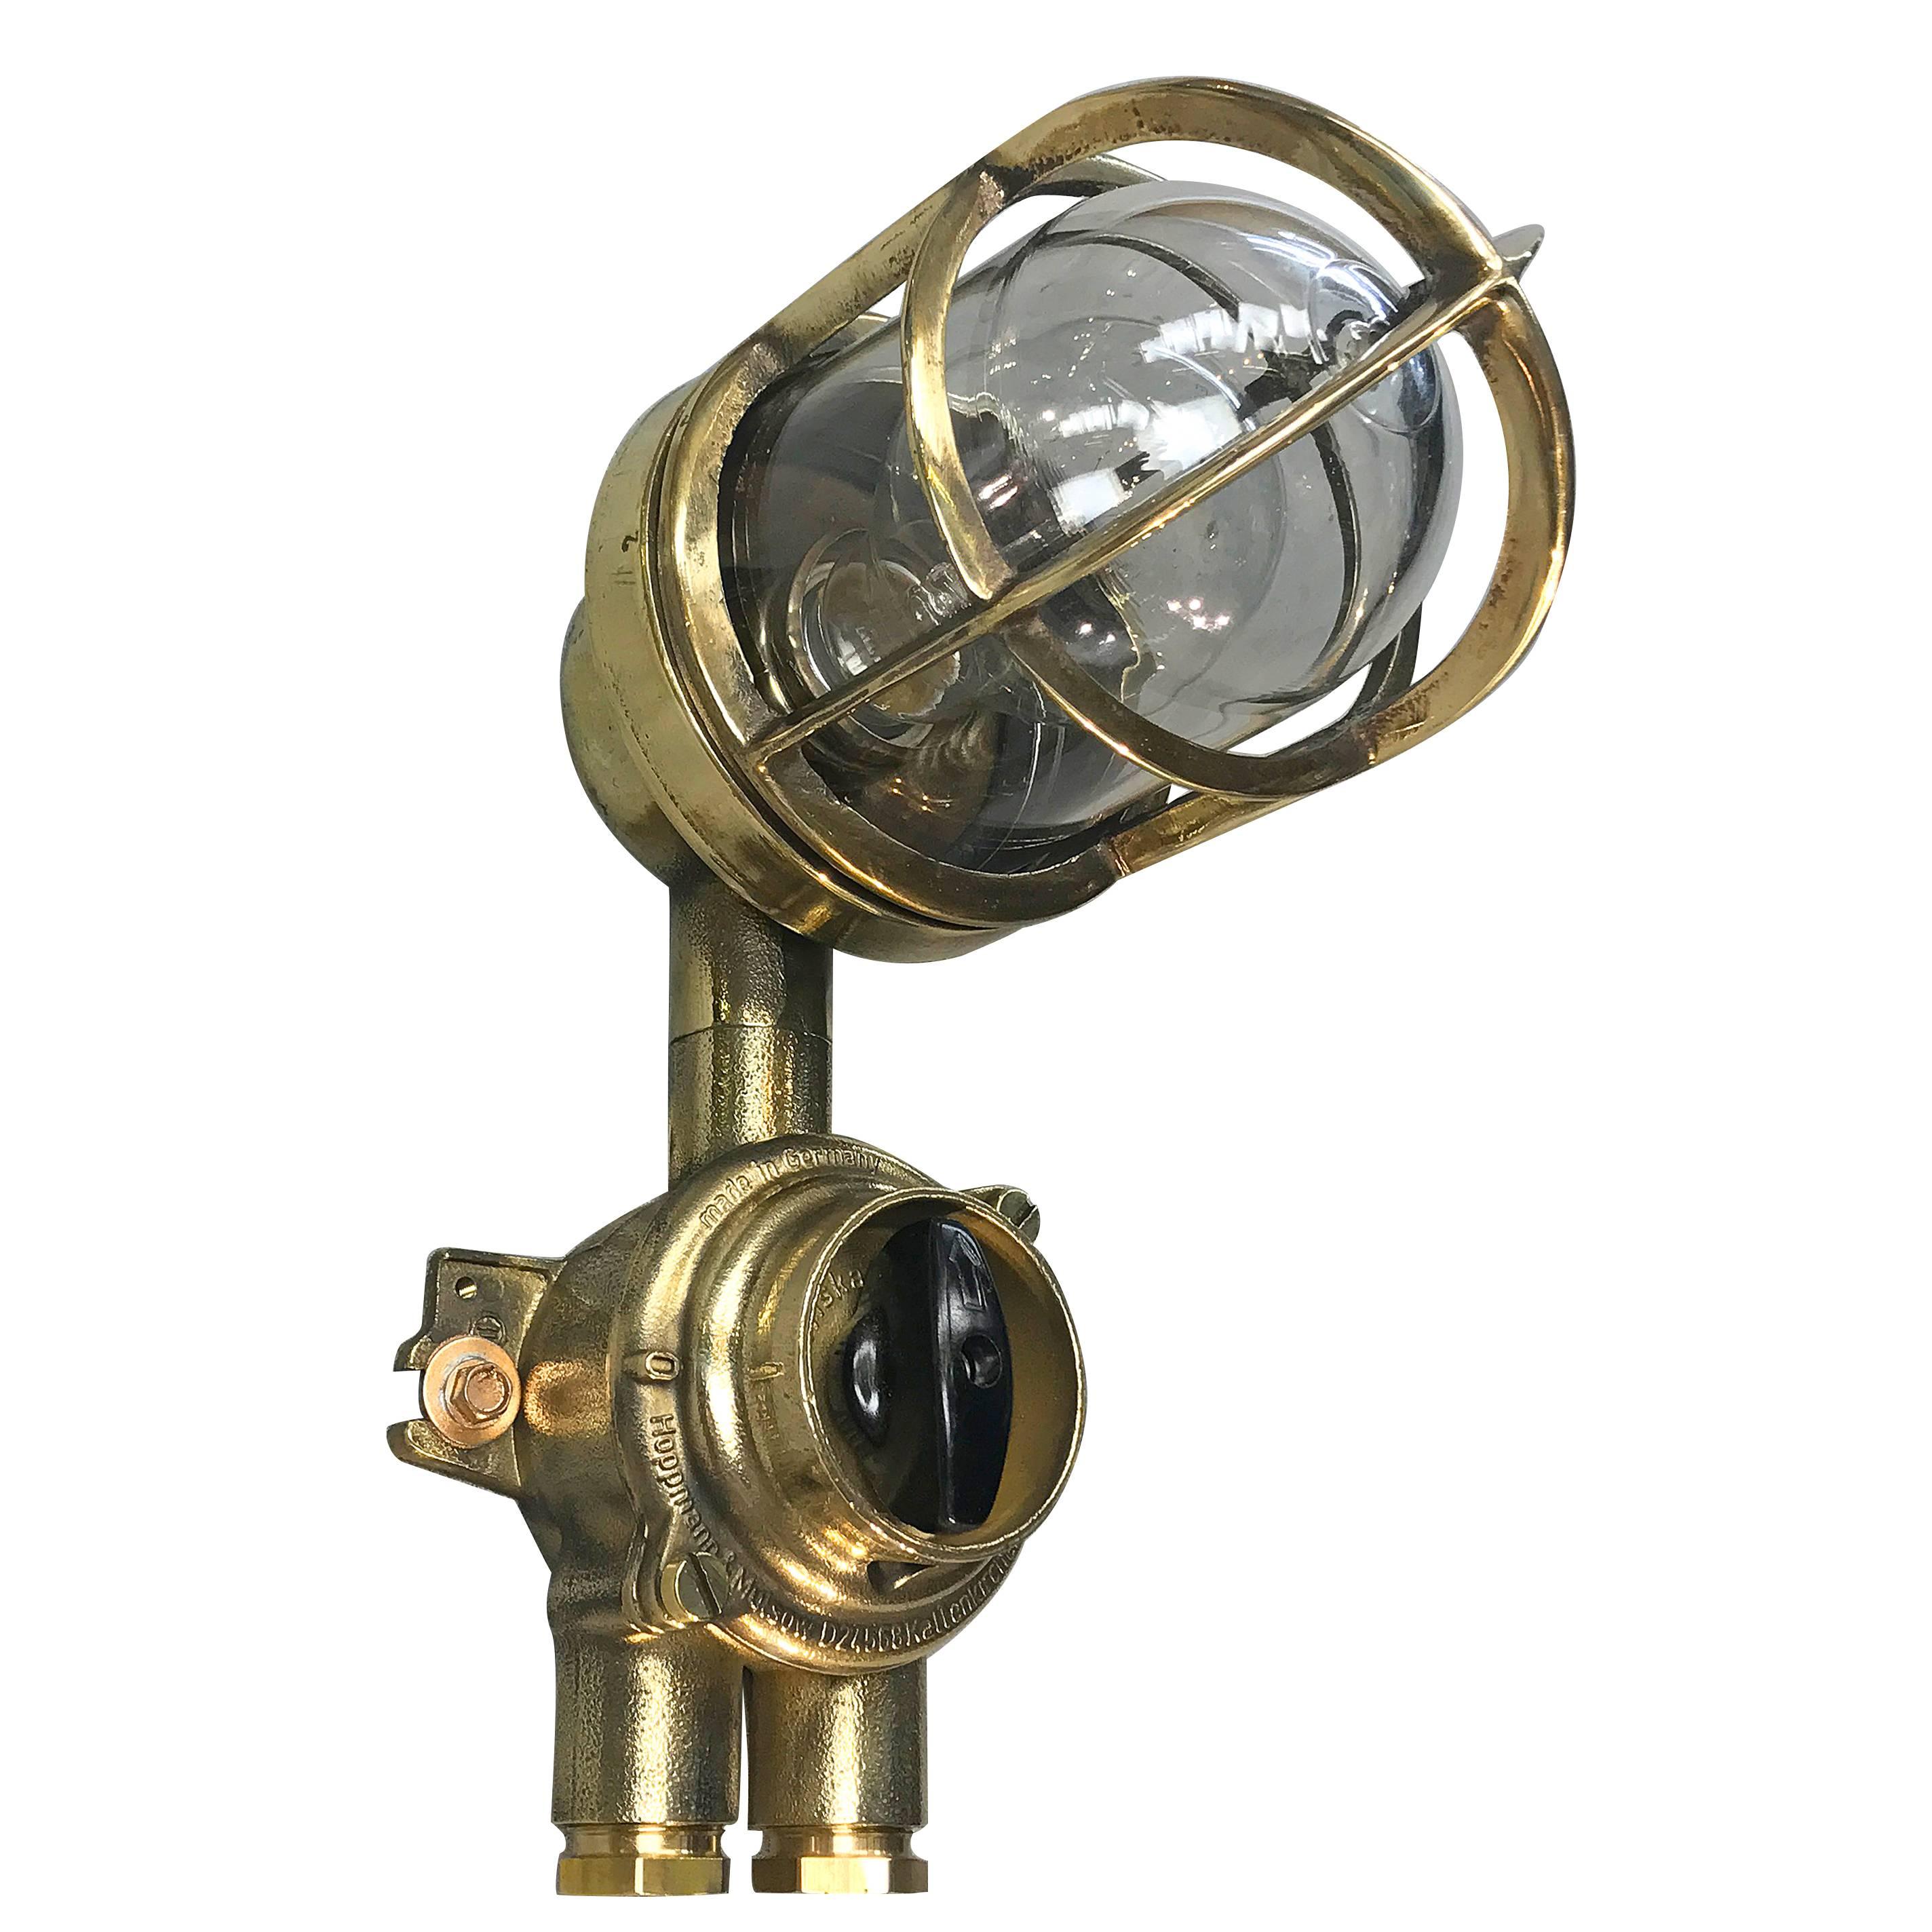 1970's German Brass Wall Lamp with Glass Dome & Isolator Switch IP54 Edison Bulb